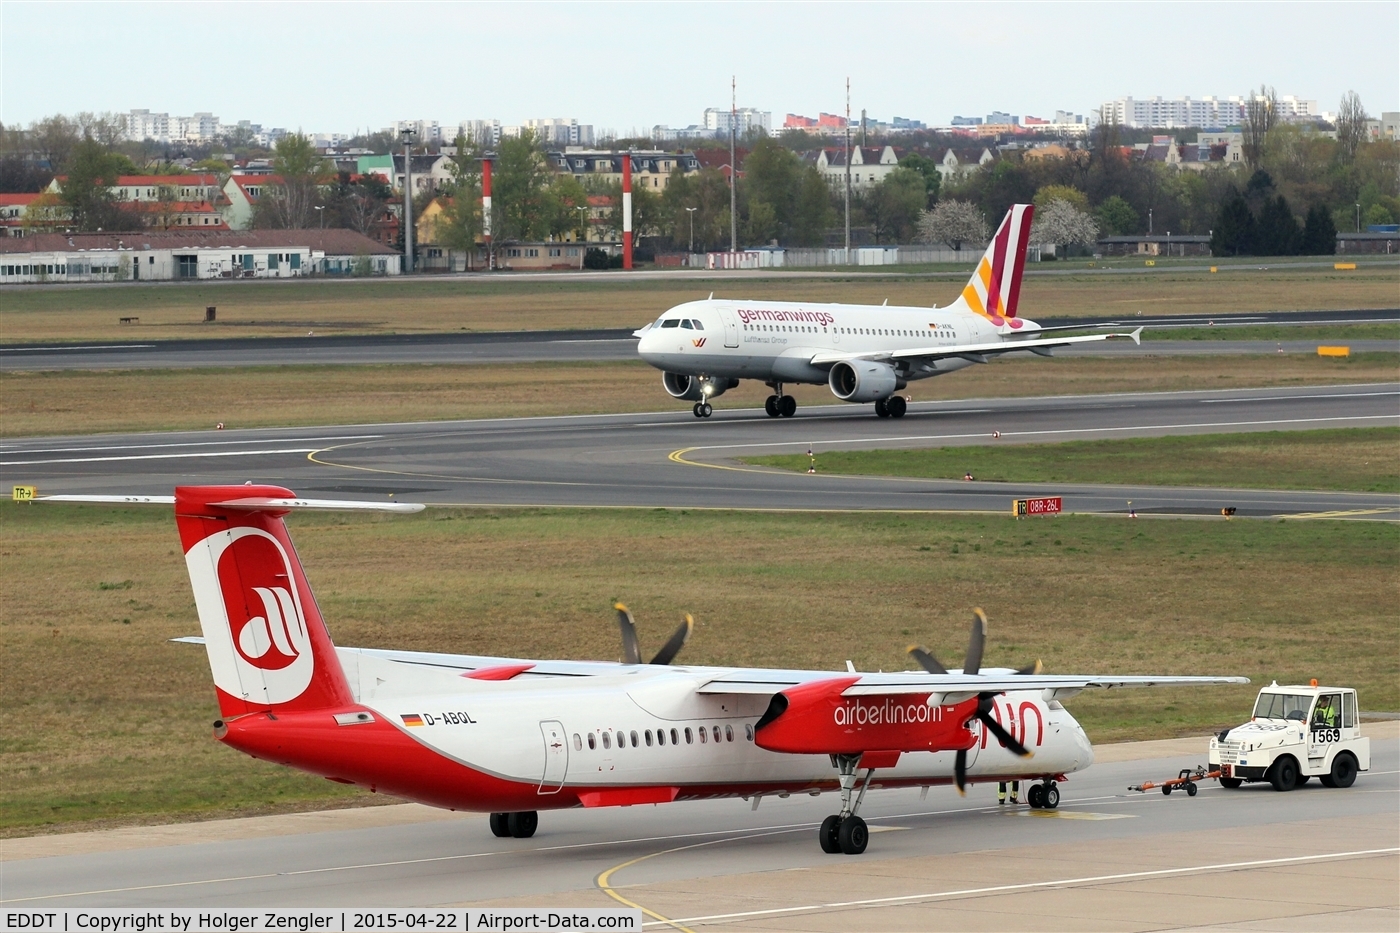 Tegel International Airport (closing in 2011), Berlin Germany (EDDT) - Coming and going on TXL.....